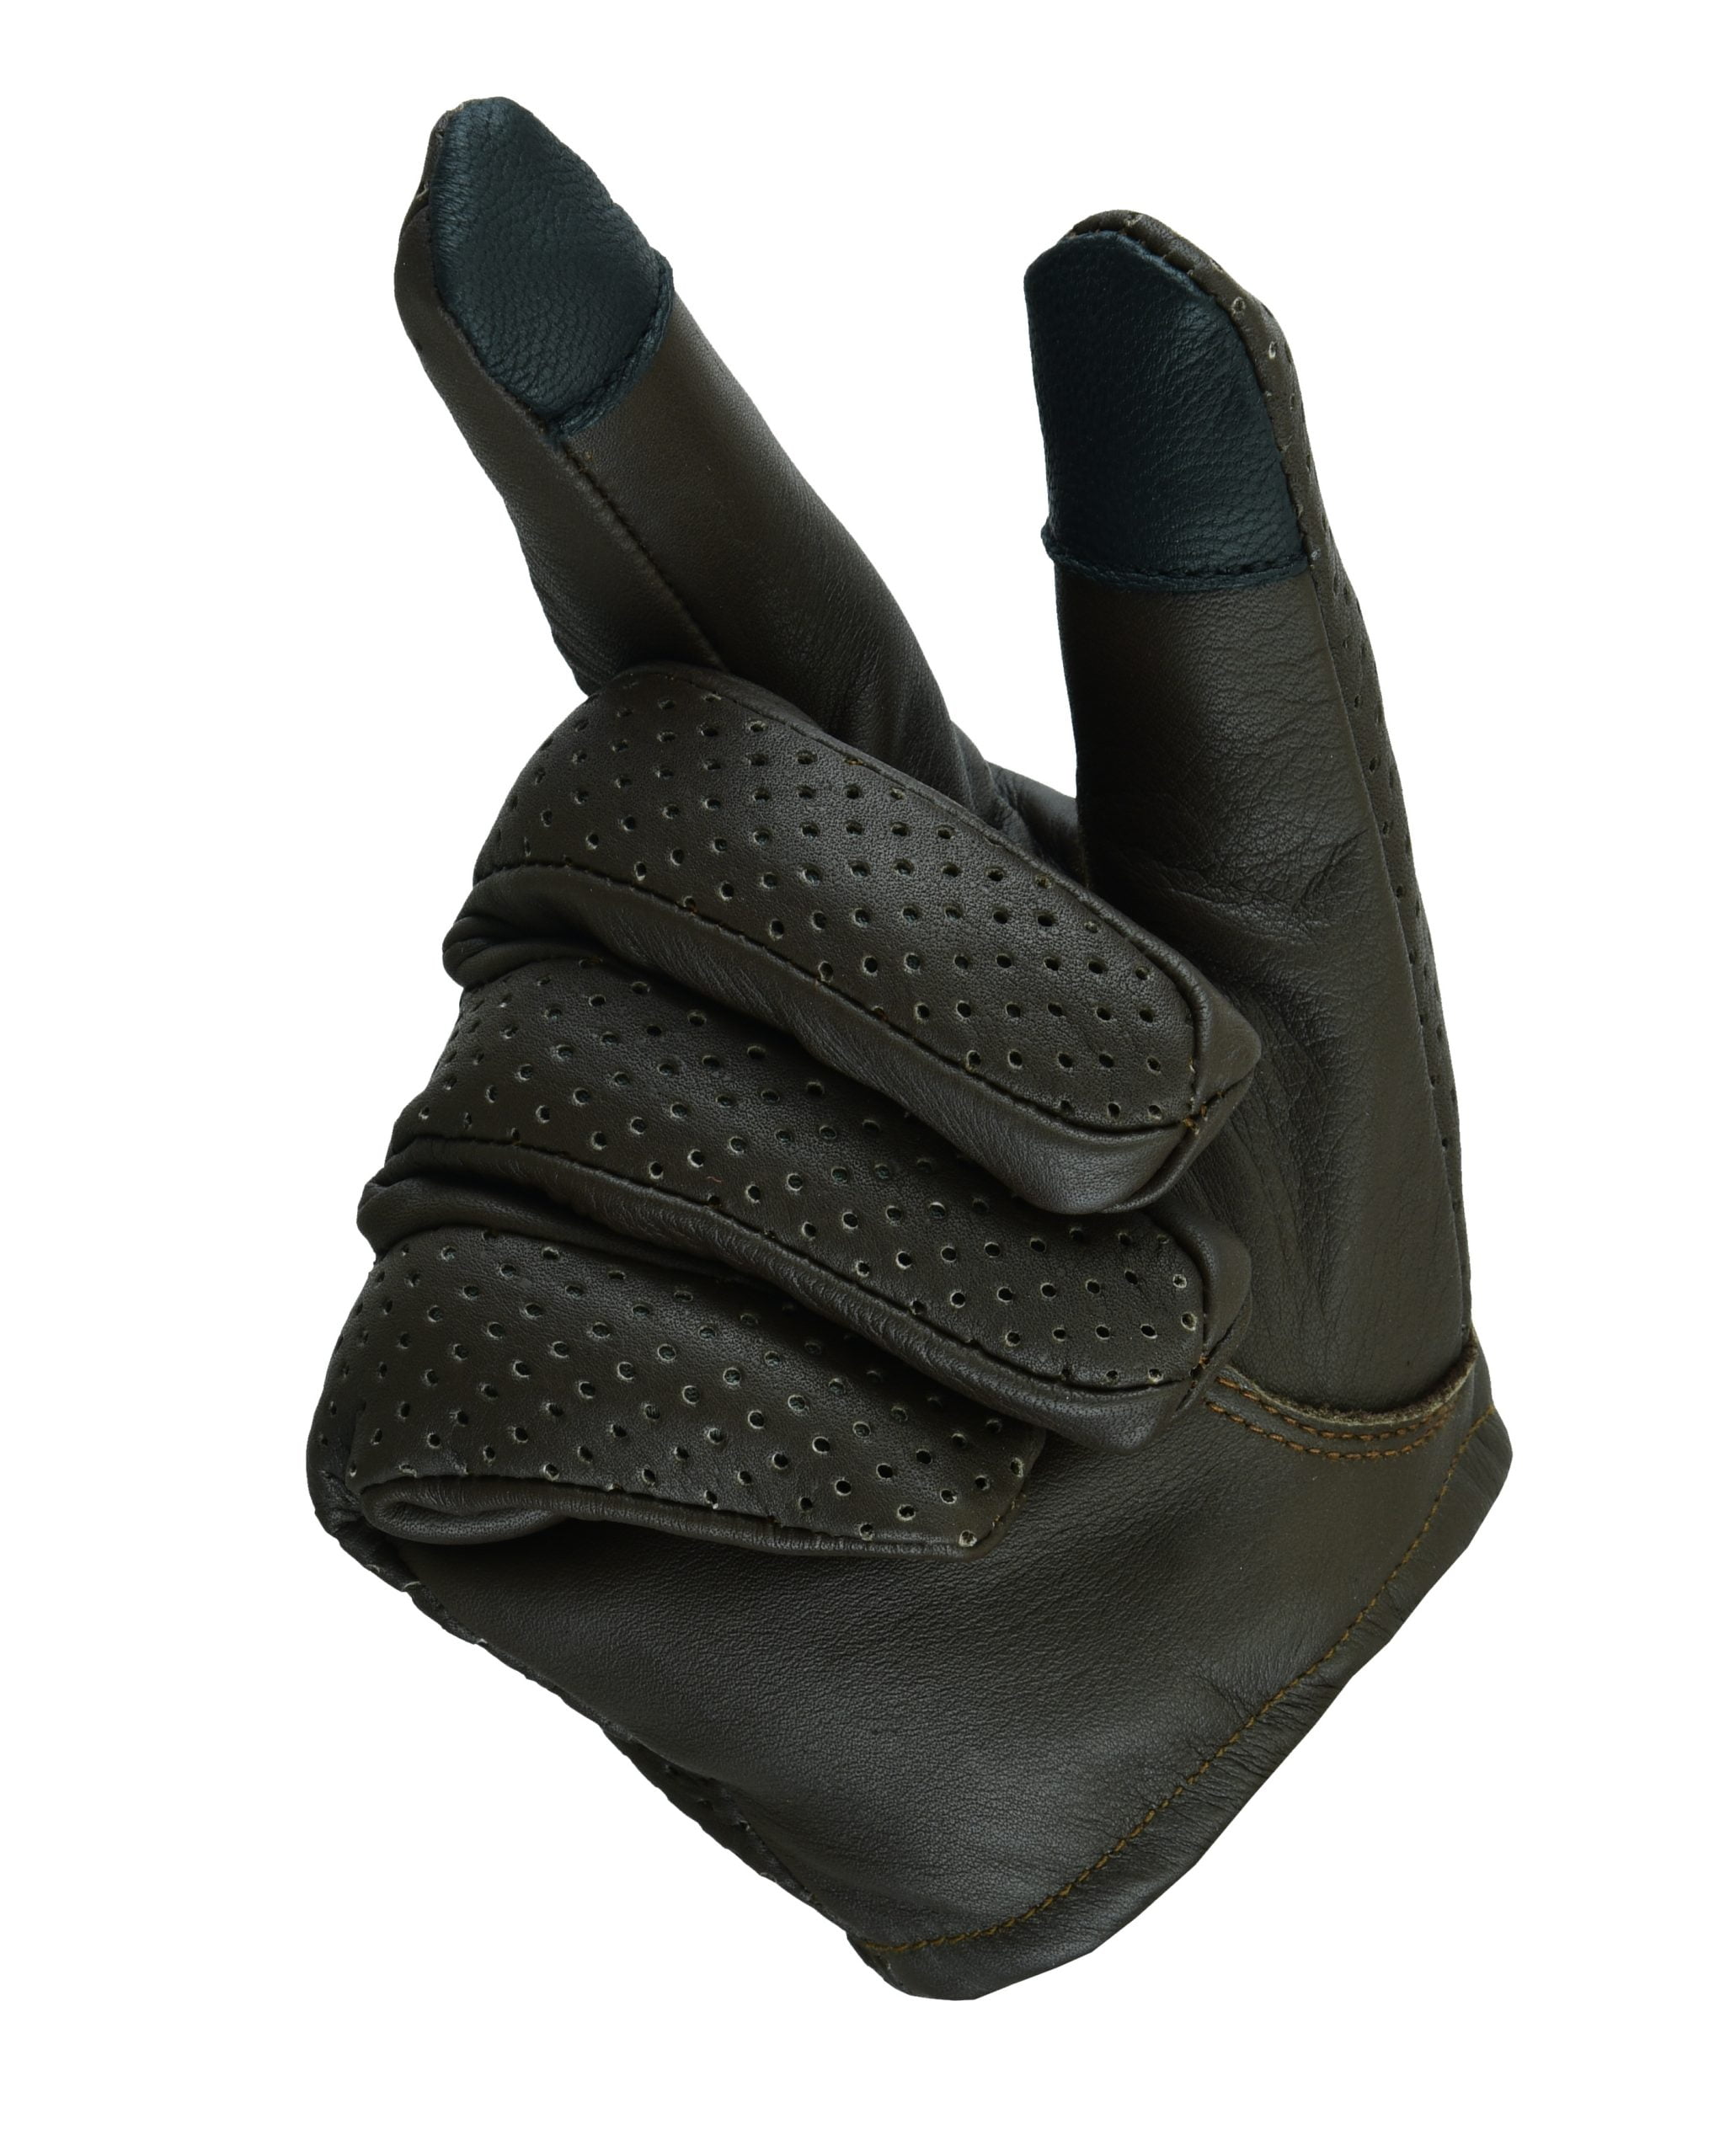 Hugger Deerskin Leather Driving Gloves Elasticated Wrist Professional Style USA 